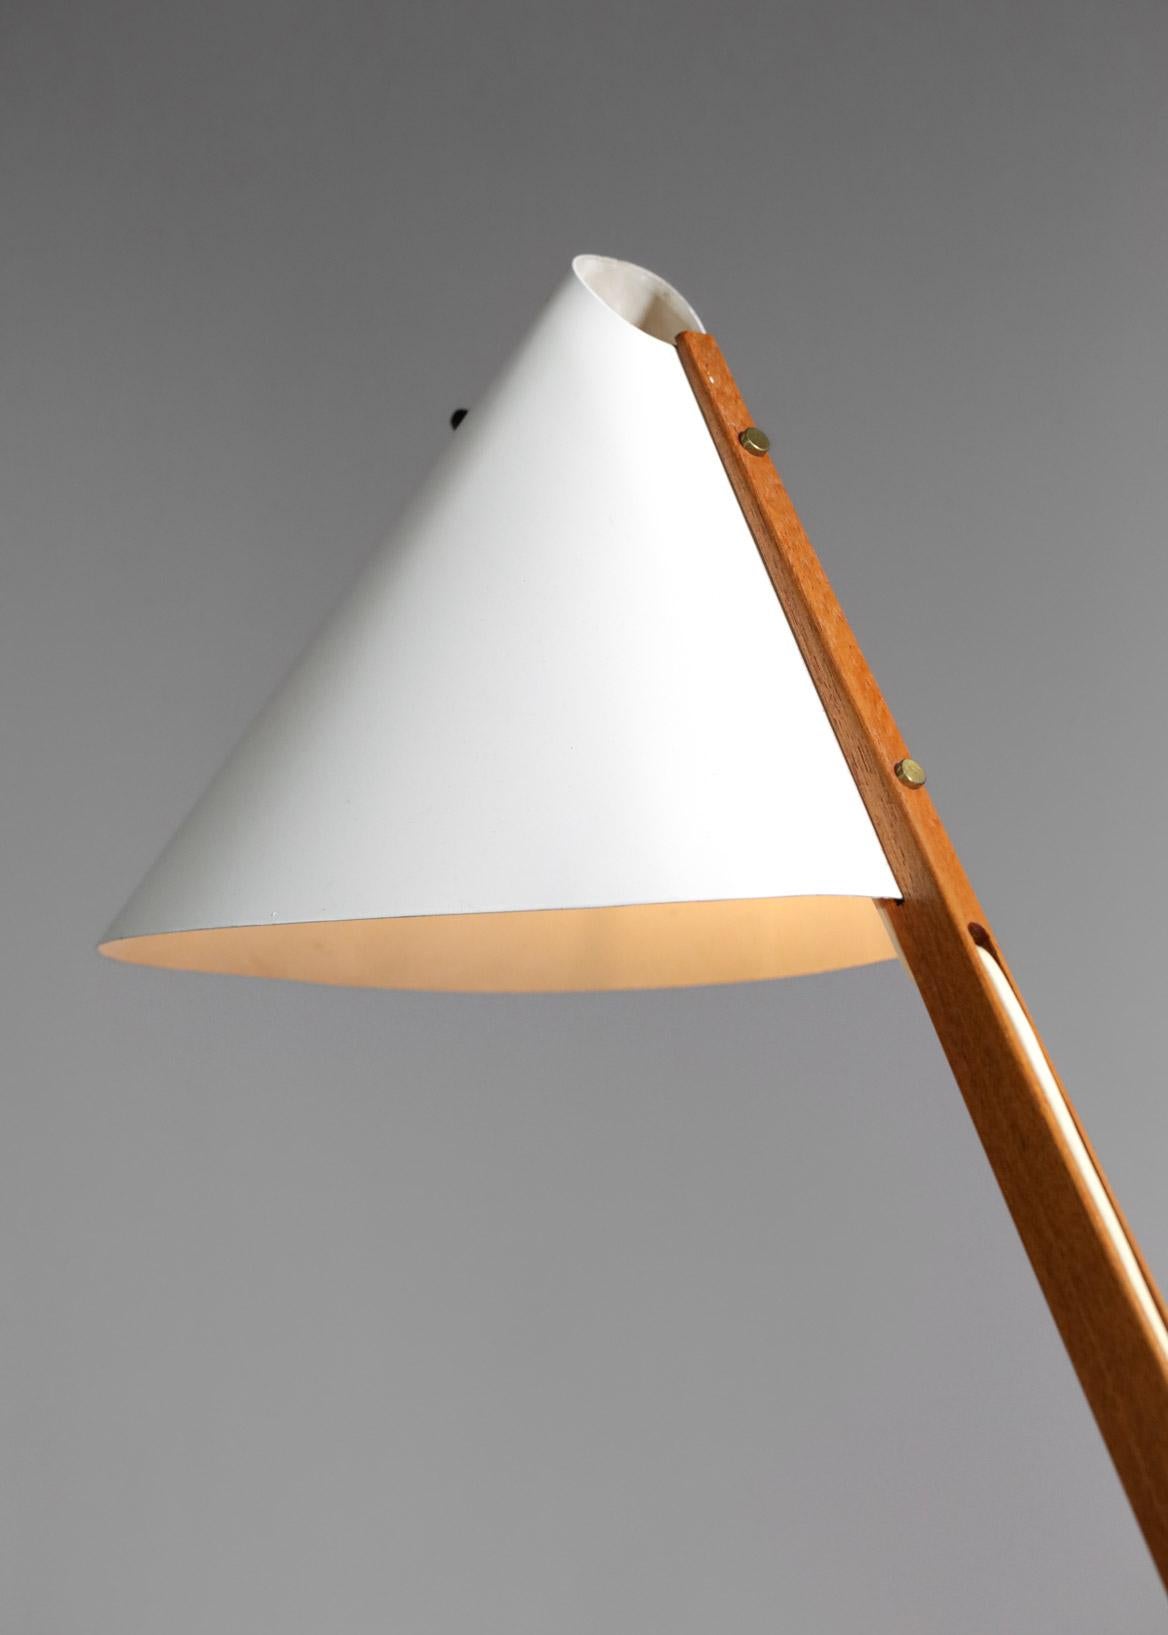 Scandinavian desk lamp by the famous Swedish designer Hans-Agne Jakobsson for the municipality of Markaryd in the 1960s. Solid teak arm, white lacquered metal base and shade (original paint) with solid brass inlays. Excellent vintage condition,